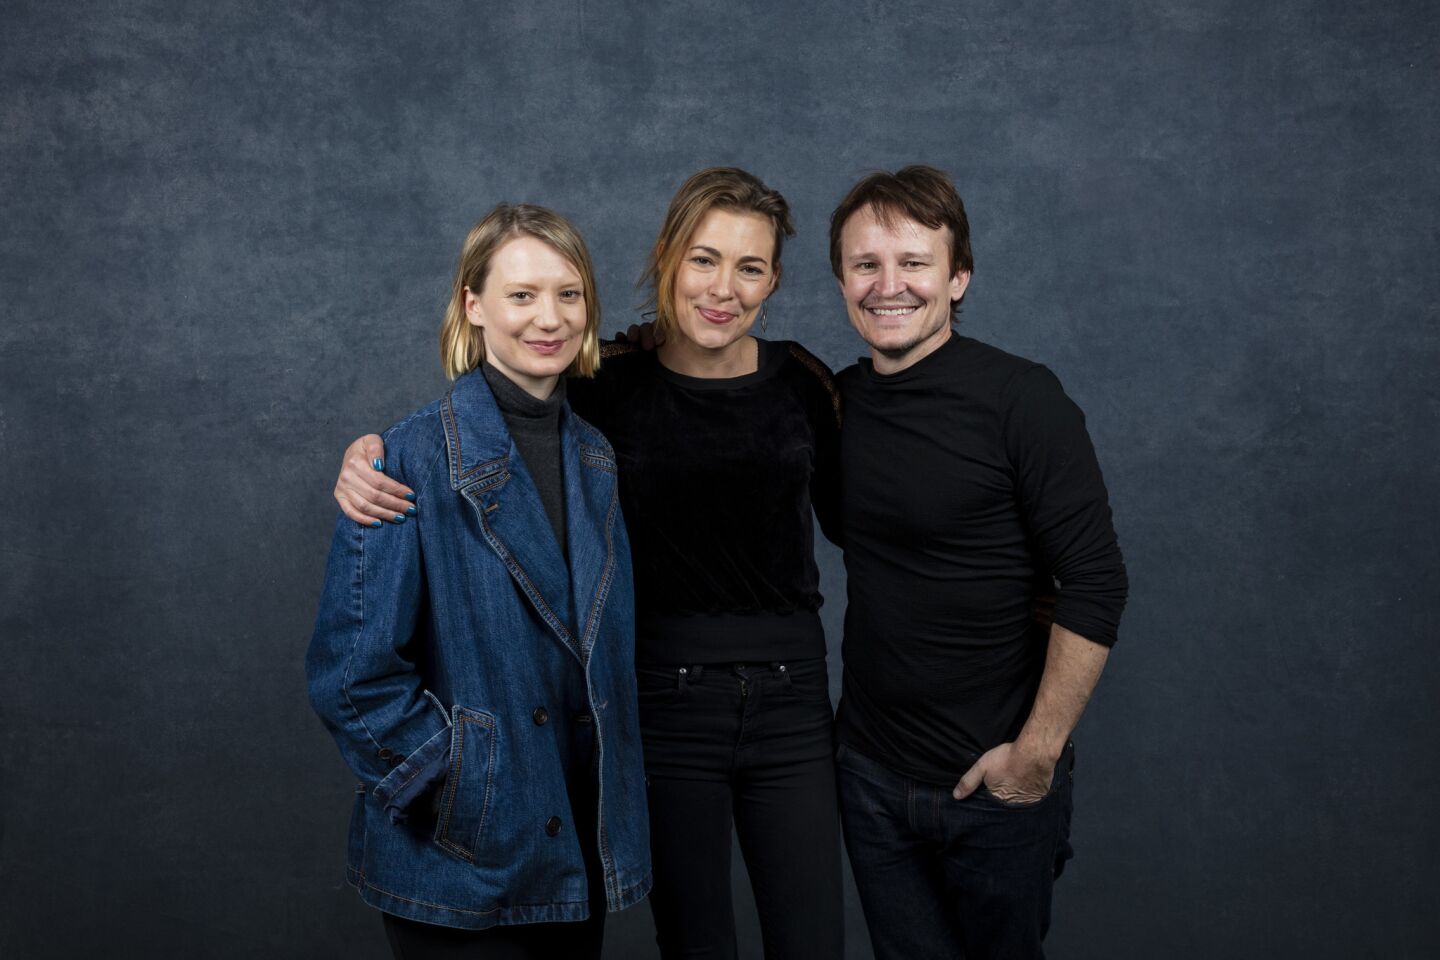 Actor Mia Wasikowska, director Mirrah Foulkes and actor Damon Herriman from the film "Judy and Punch."